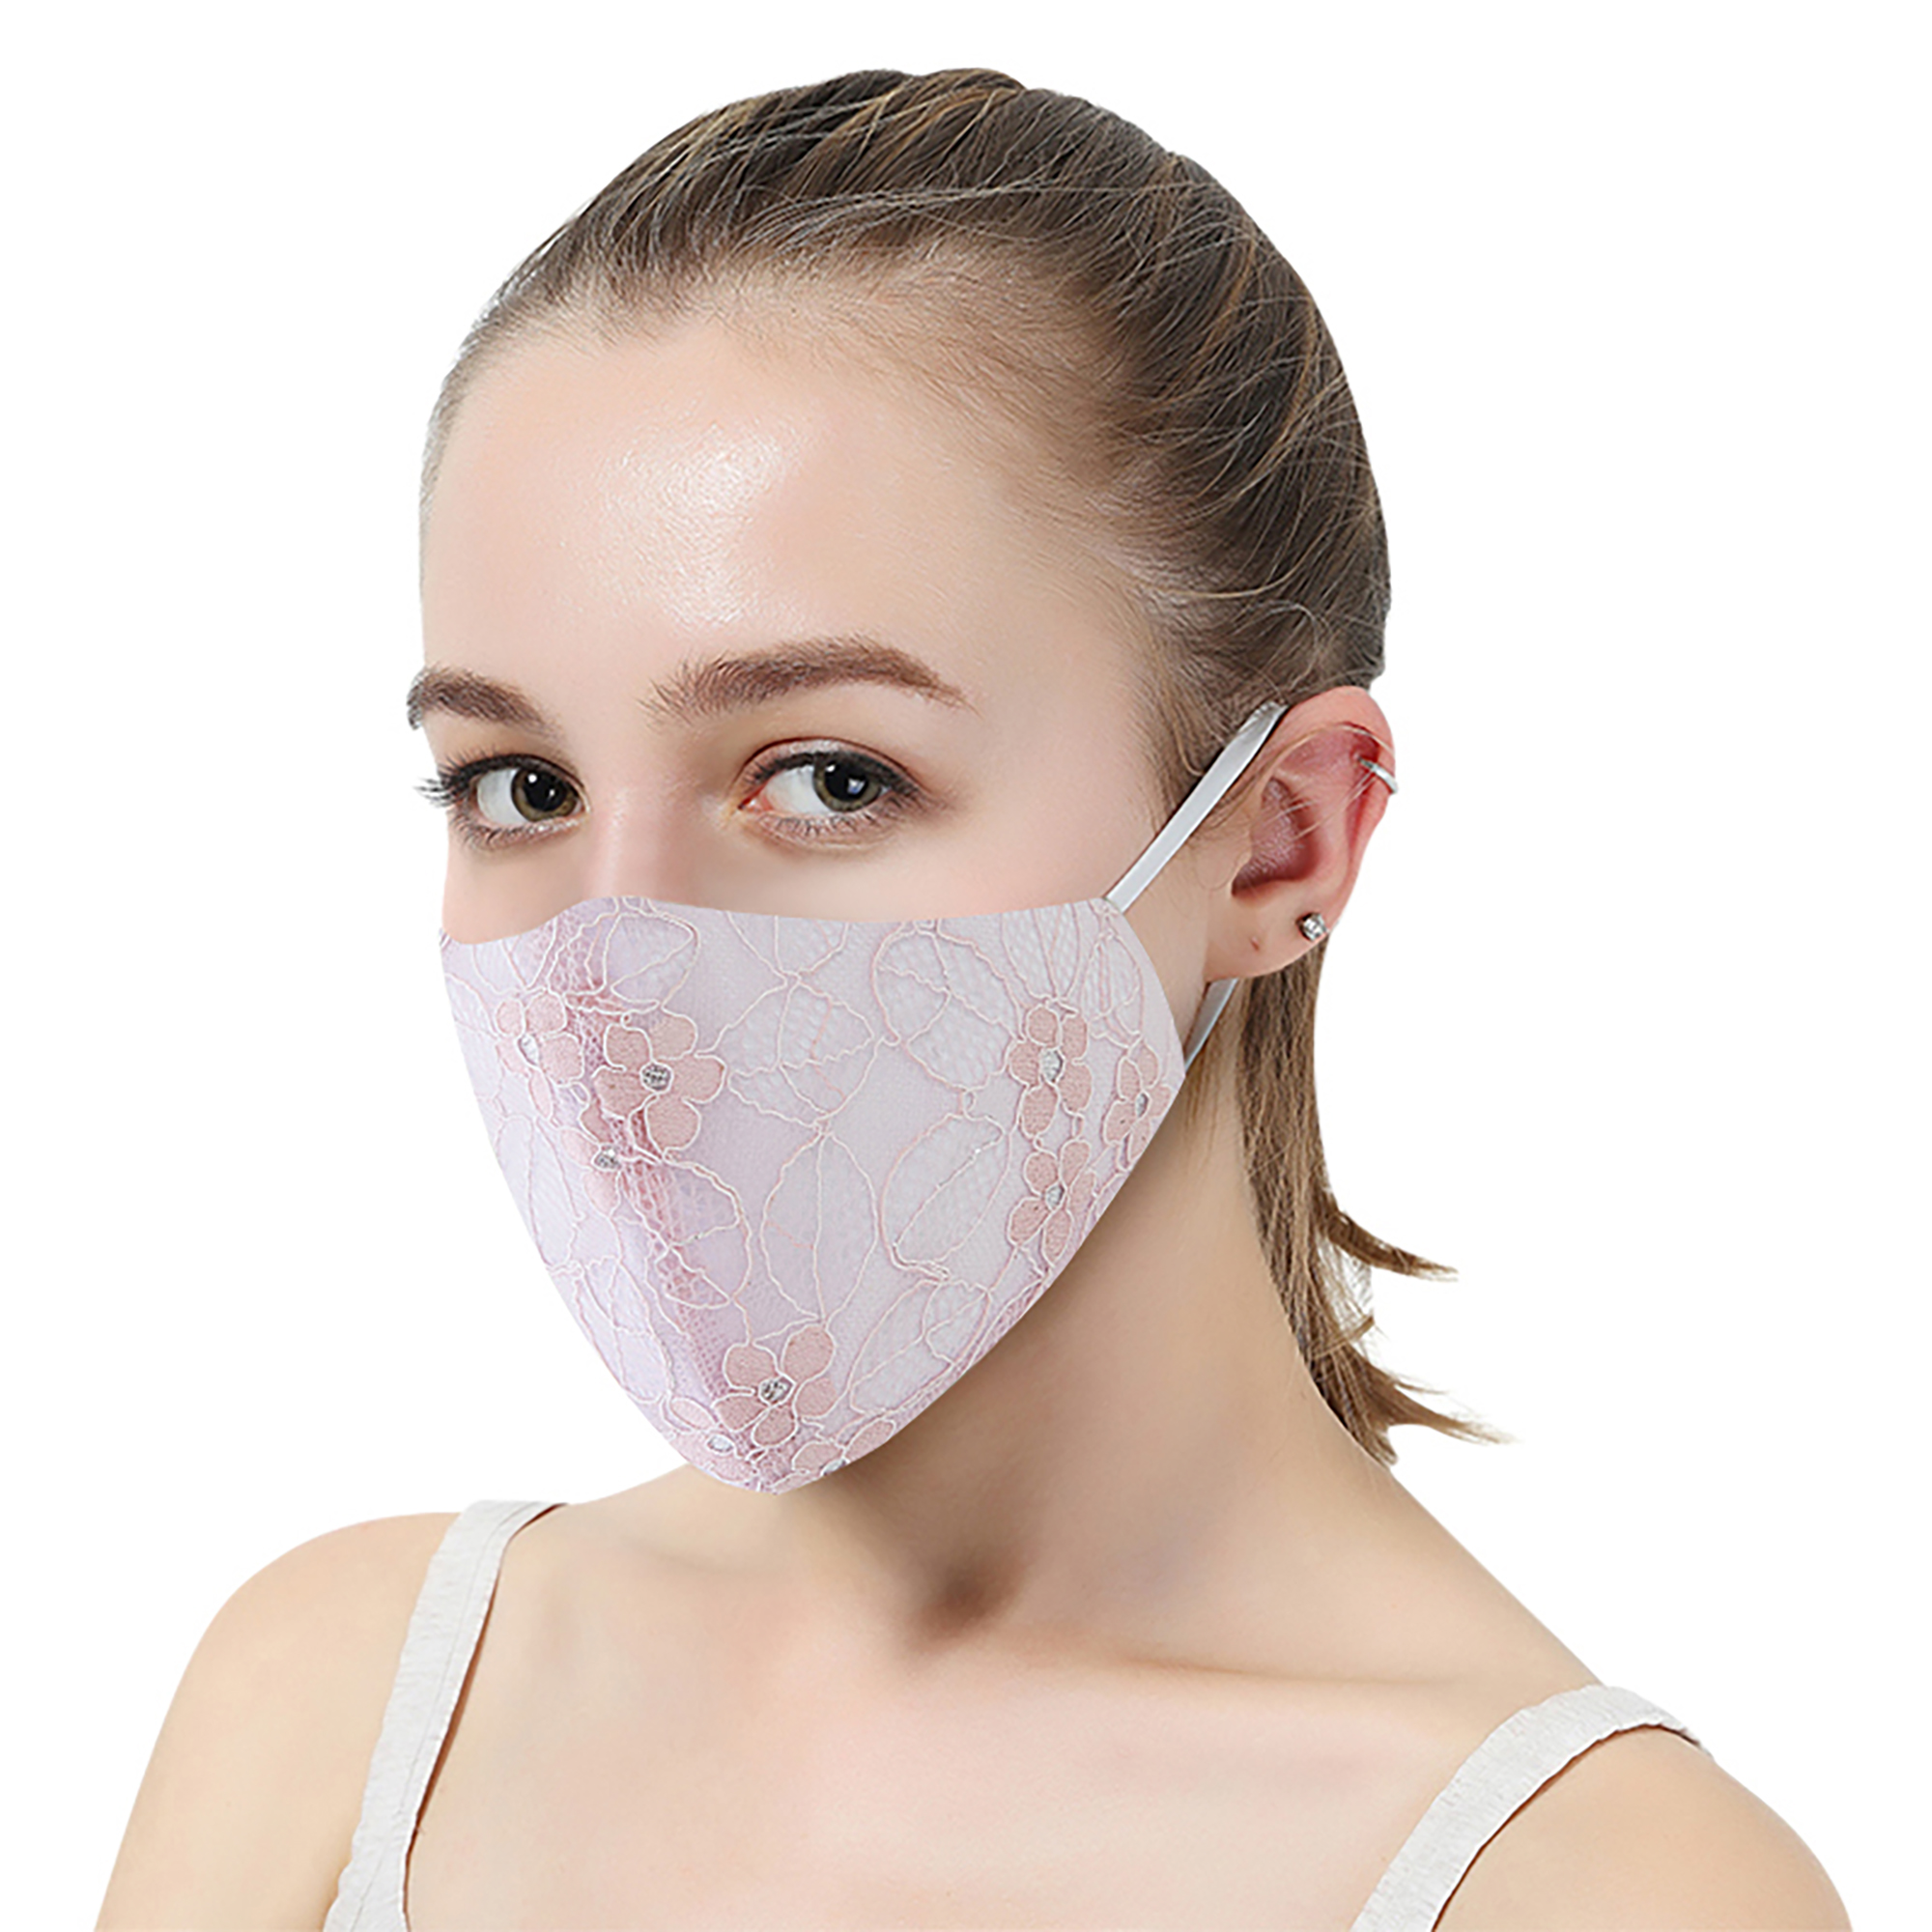 Fashion Lace Face Mask Adjustable Washable Reusable Mouth Covering Mask